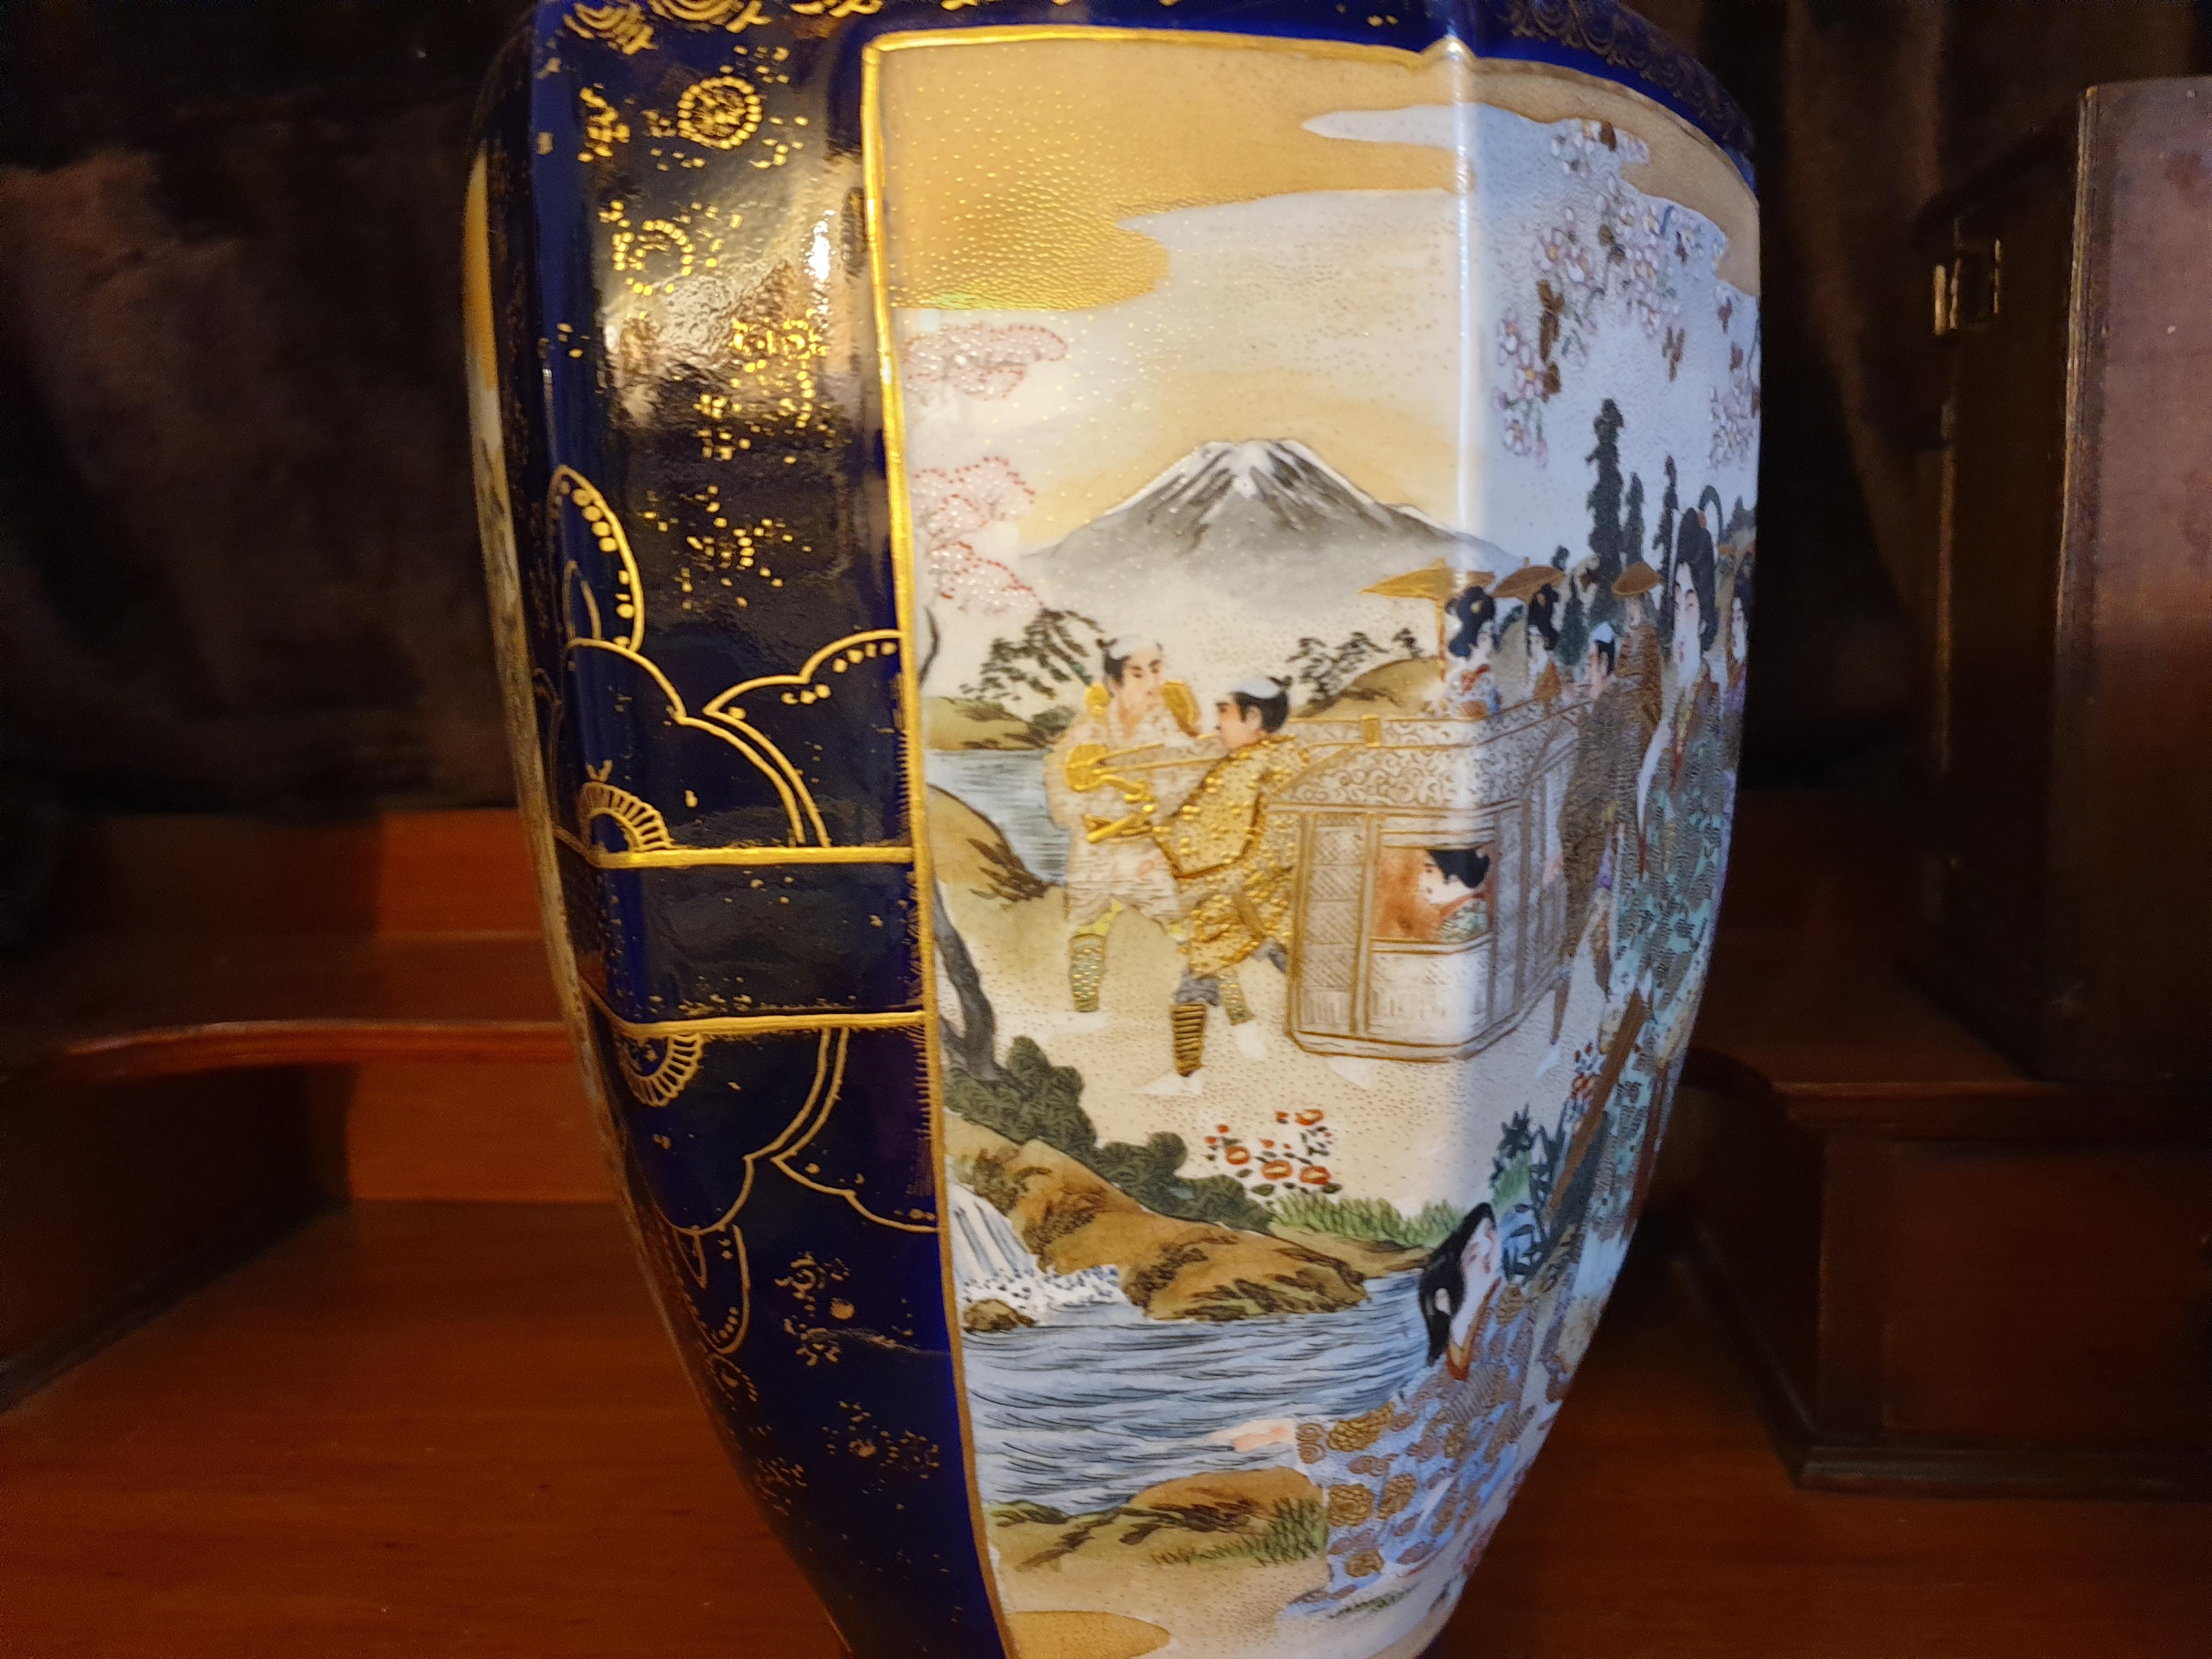 Meiji Period Pair of Japanese Satsuma Vases 19th Century With Imperial Scenes  For Sale 6